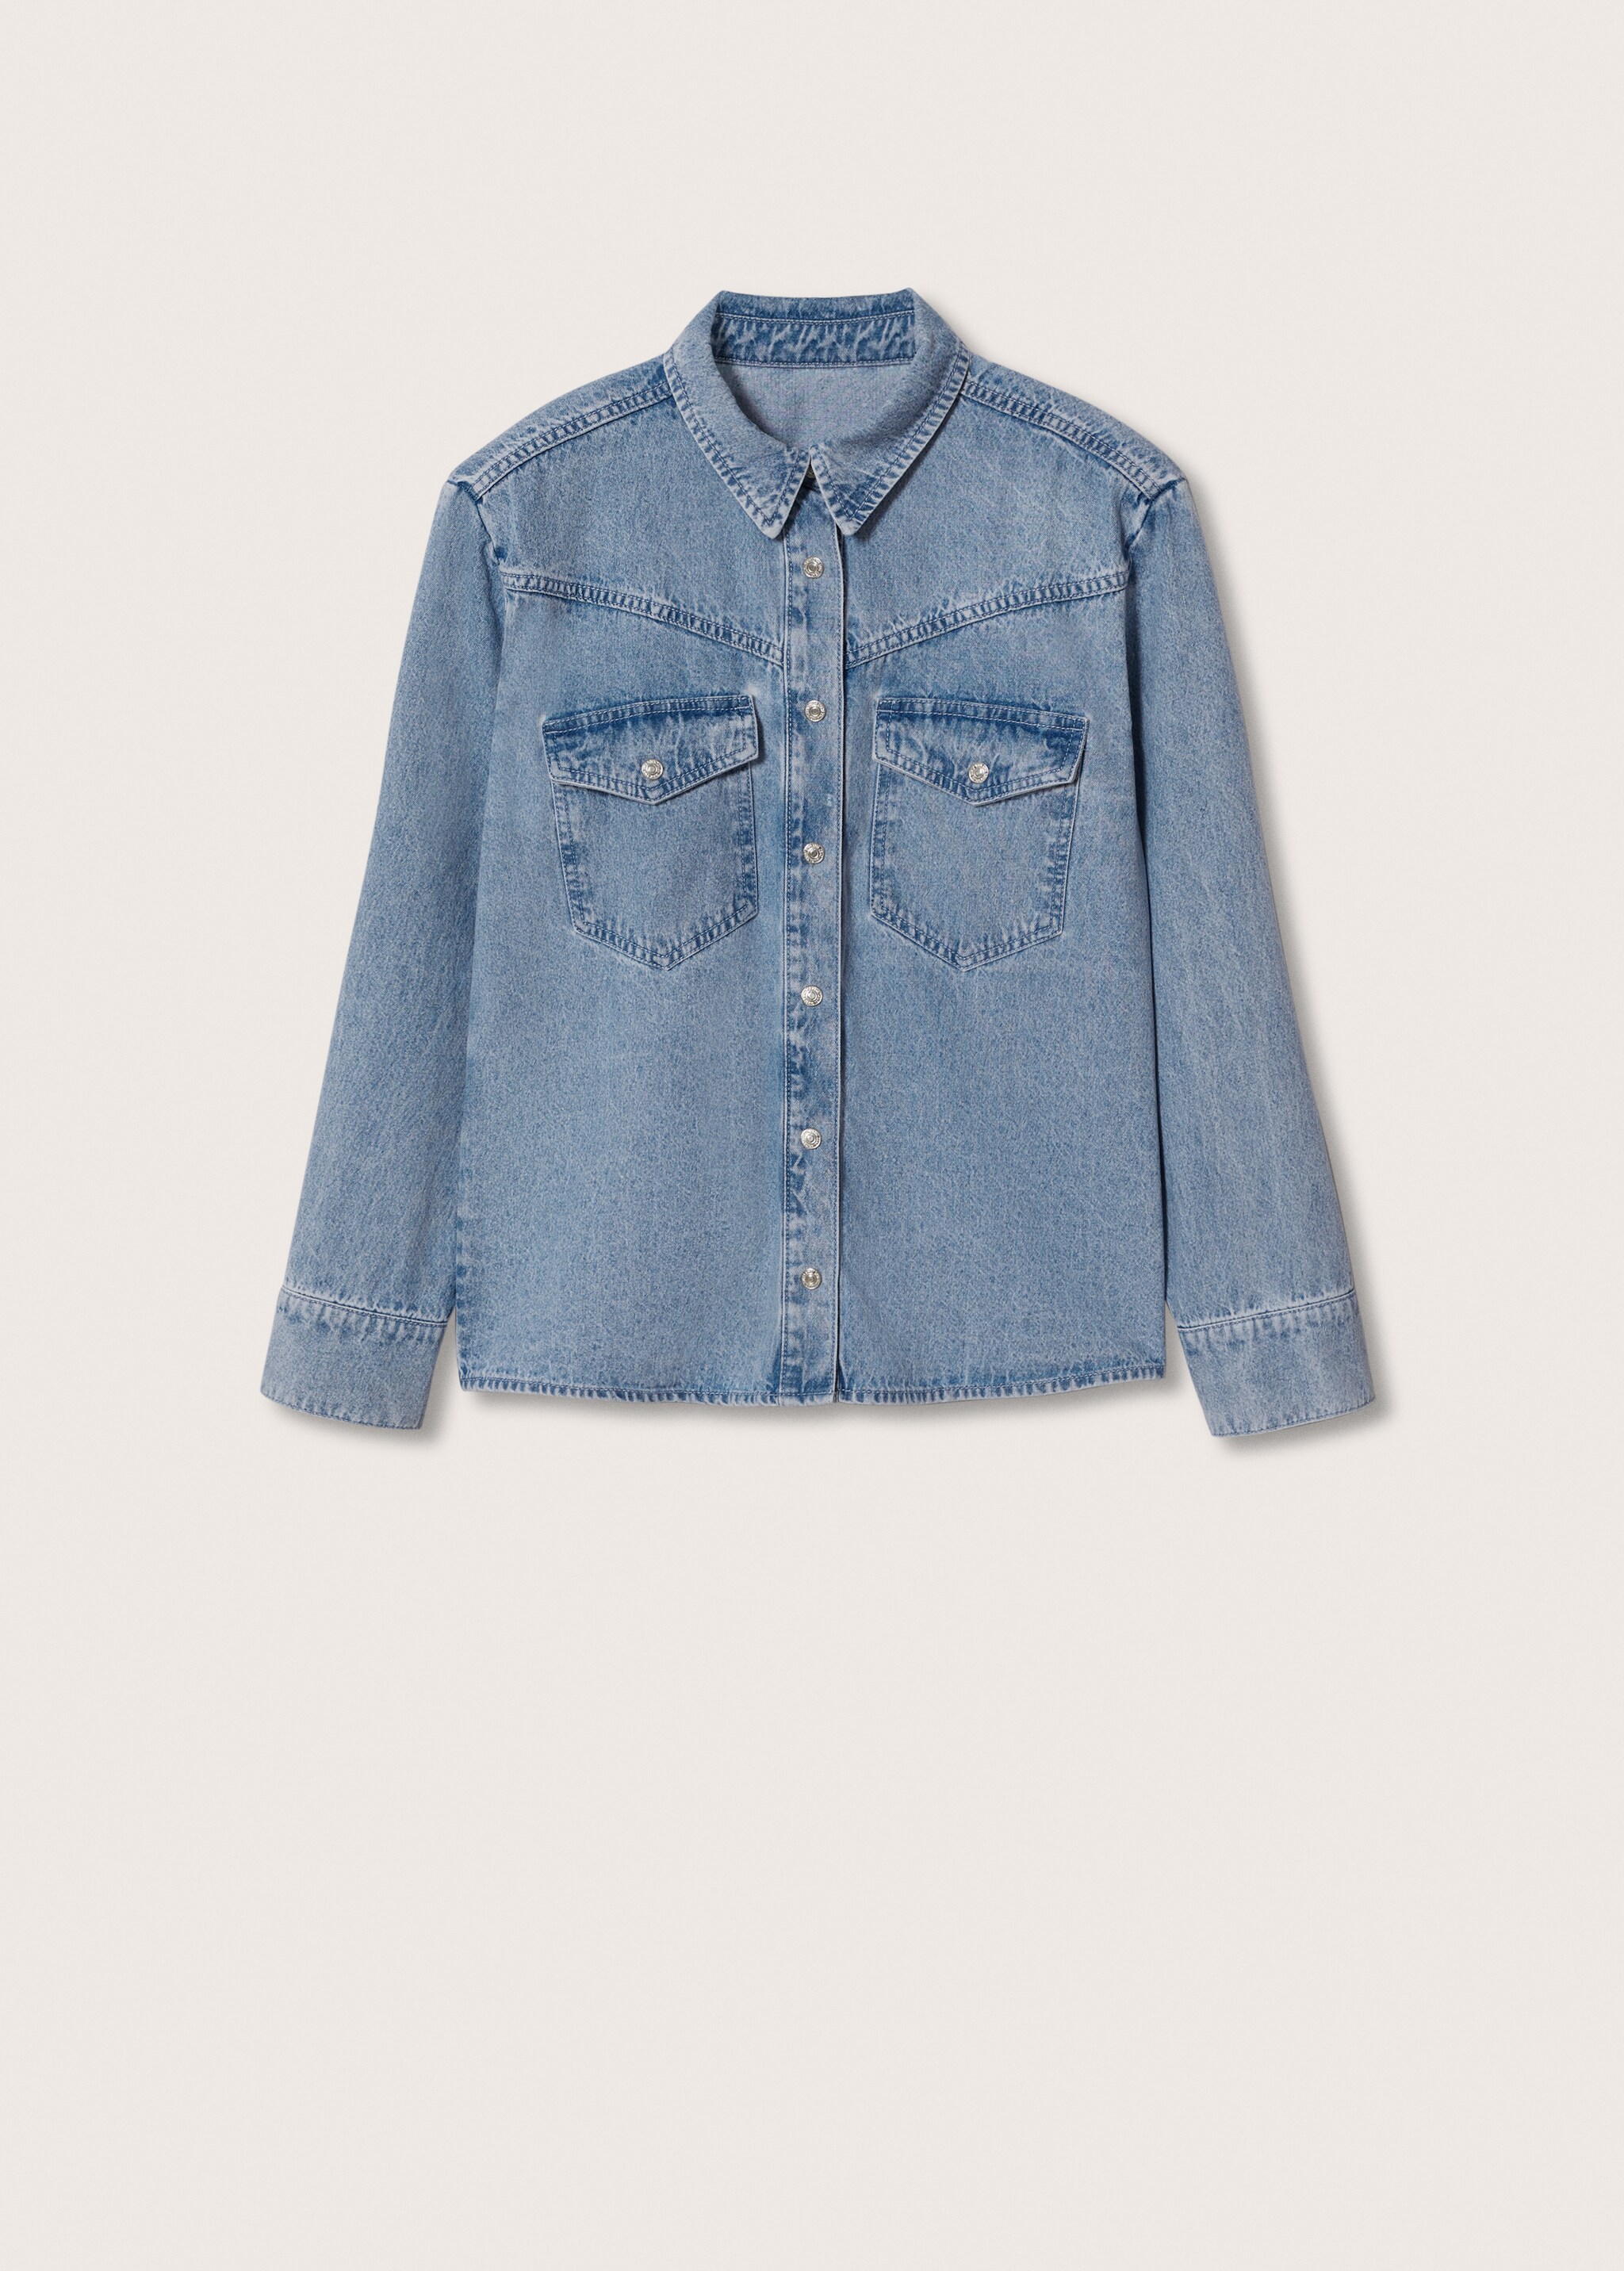 Denim shirt with shoulder pads - Article without model